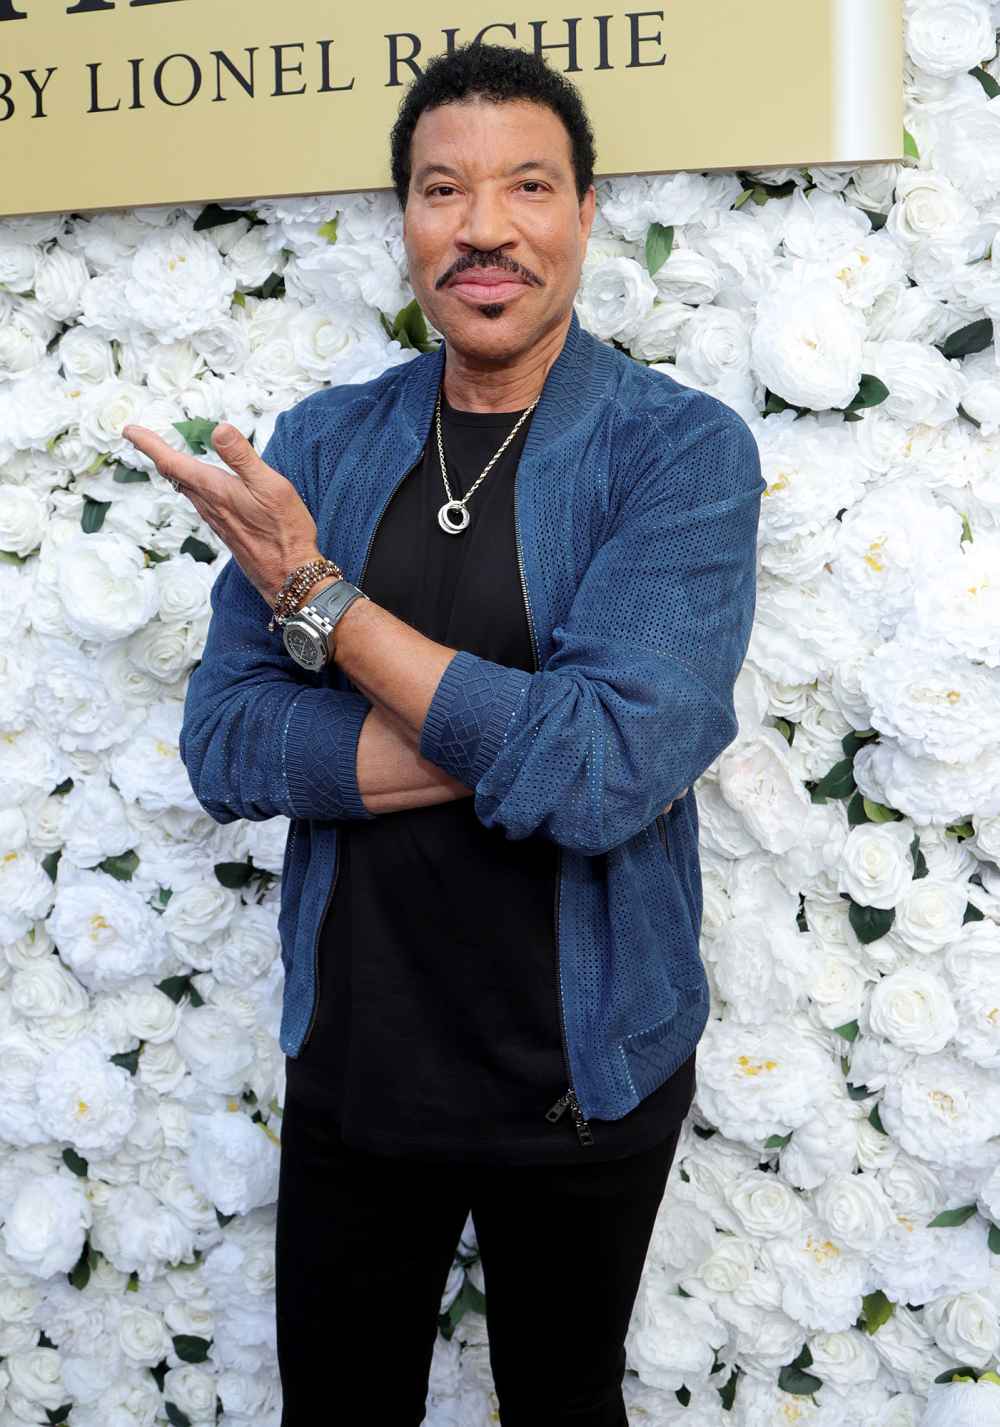 Lionel Richie Jokes About Not Being Invited to Katy Perry’s Wedding Hello by Lionel Richie Fragrance Launch